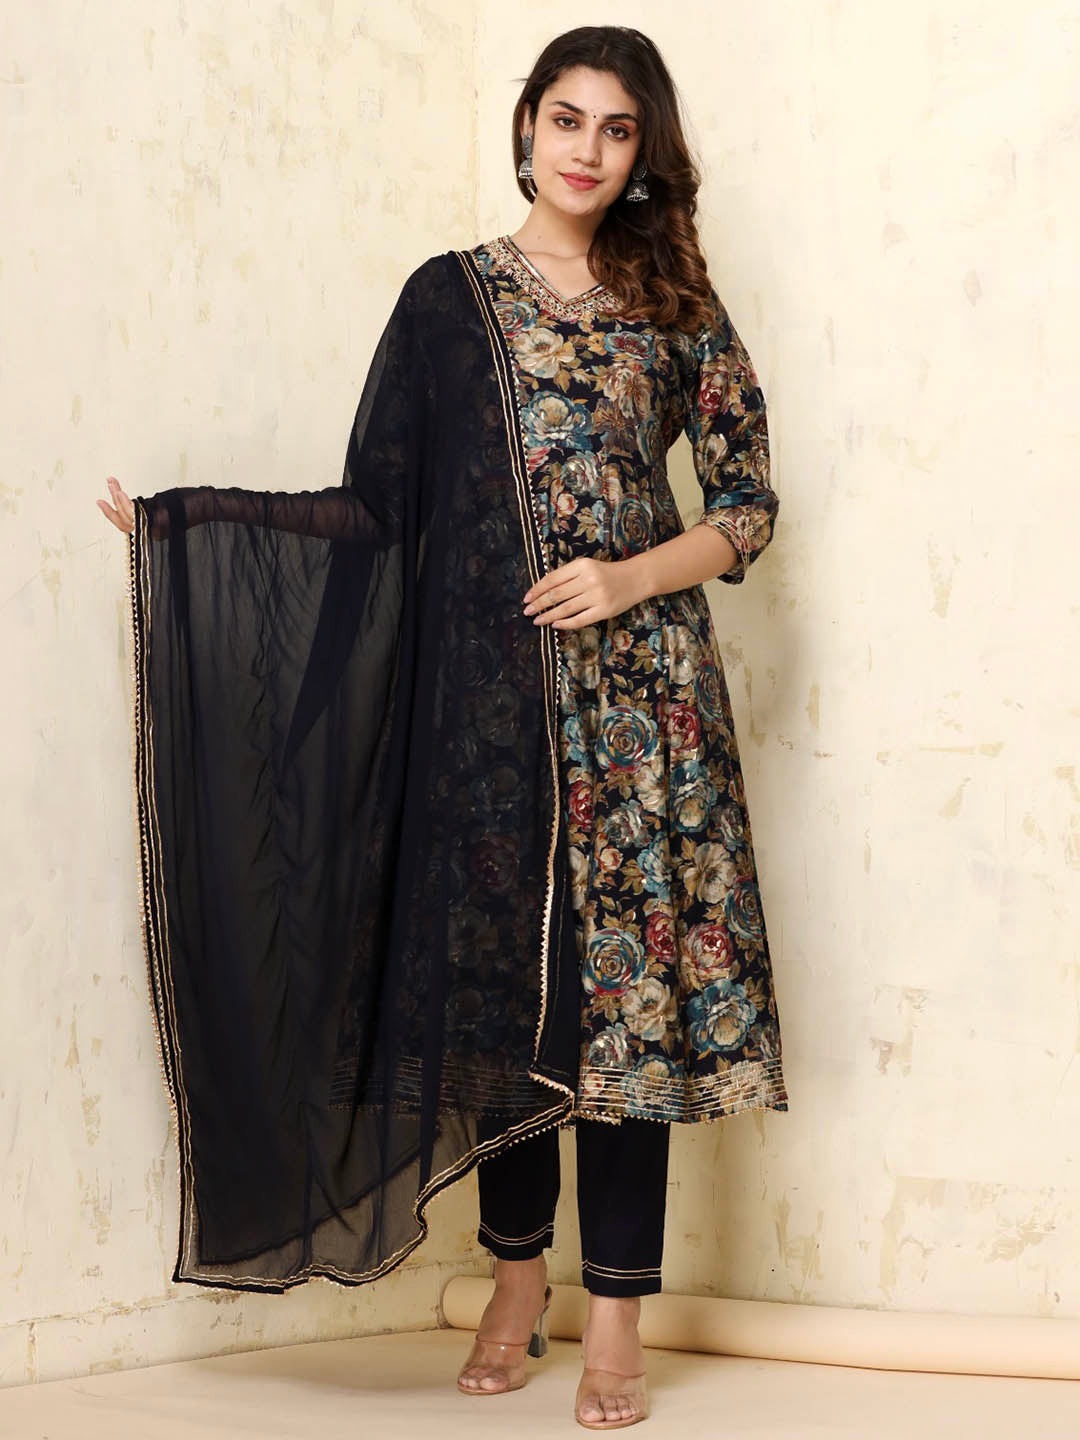 Multicolored Floral Print Anarkali Style Ethnic Suit